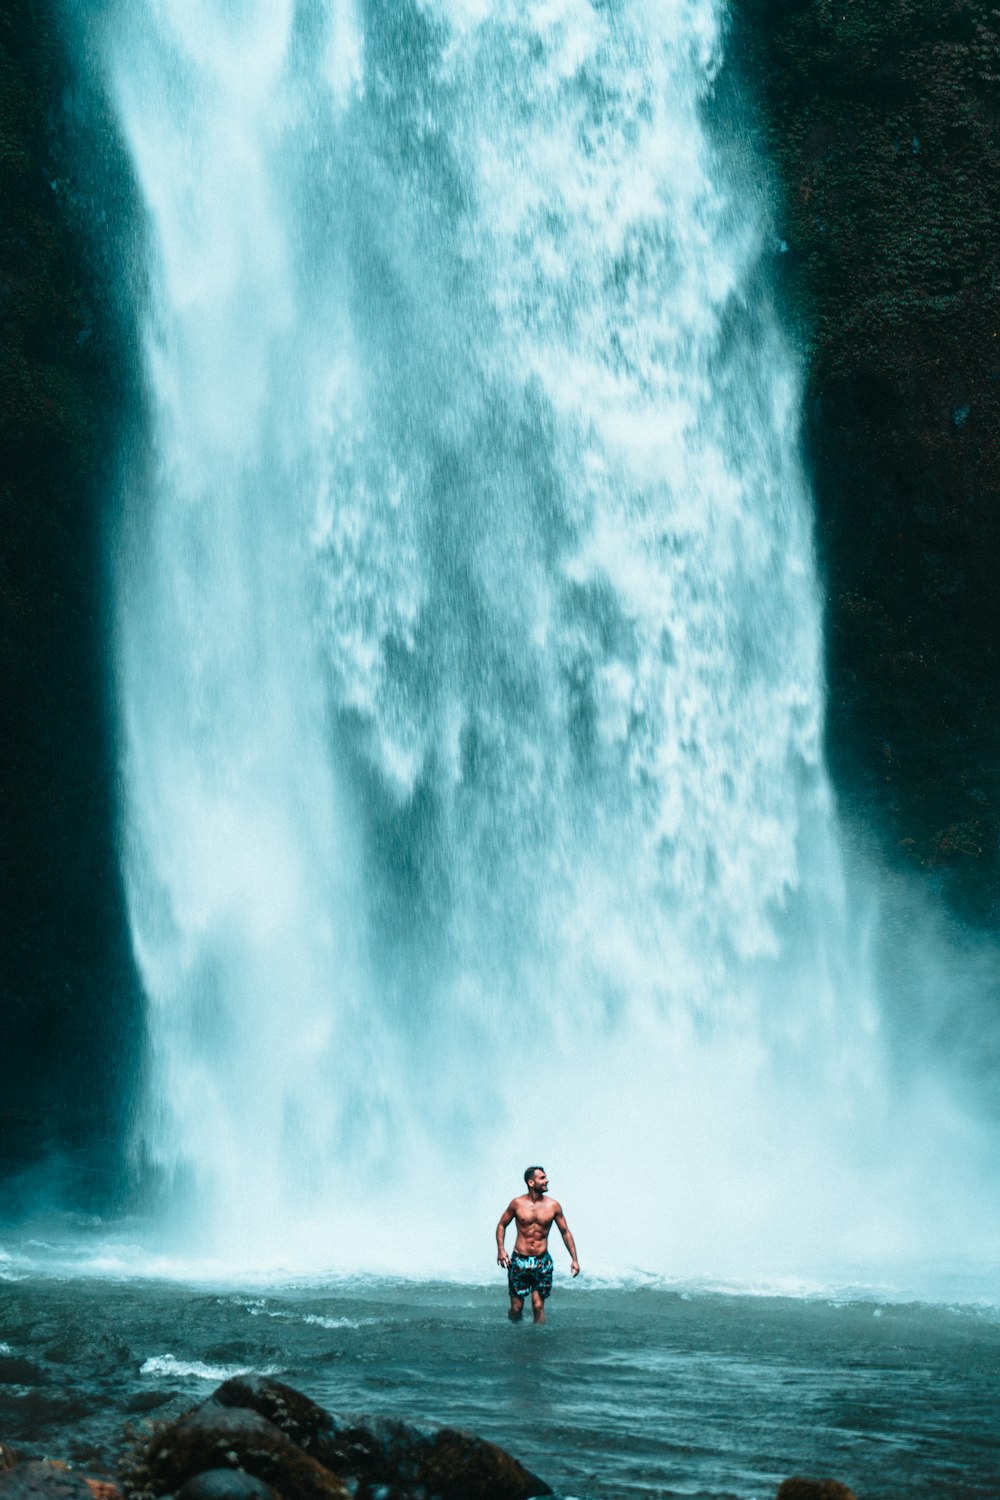 a man riding a surfboard in front of a large waterfall